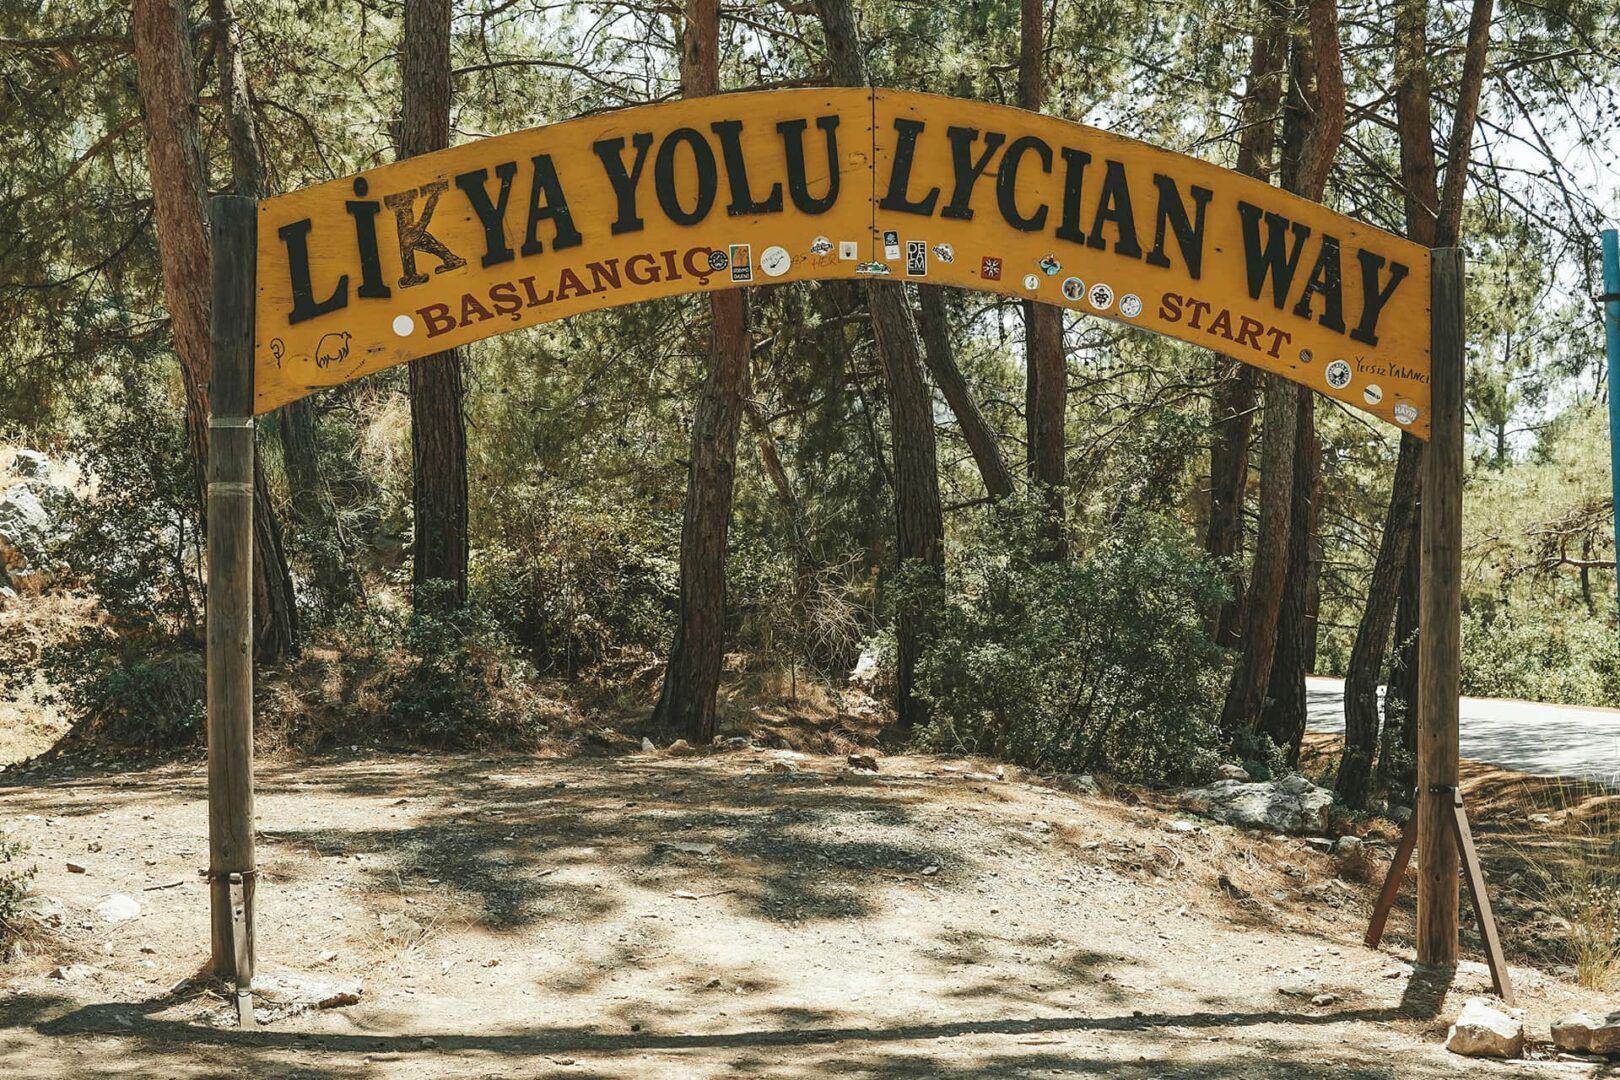 Wooden arch with text on it in forest